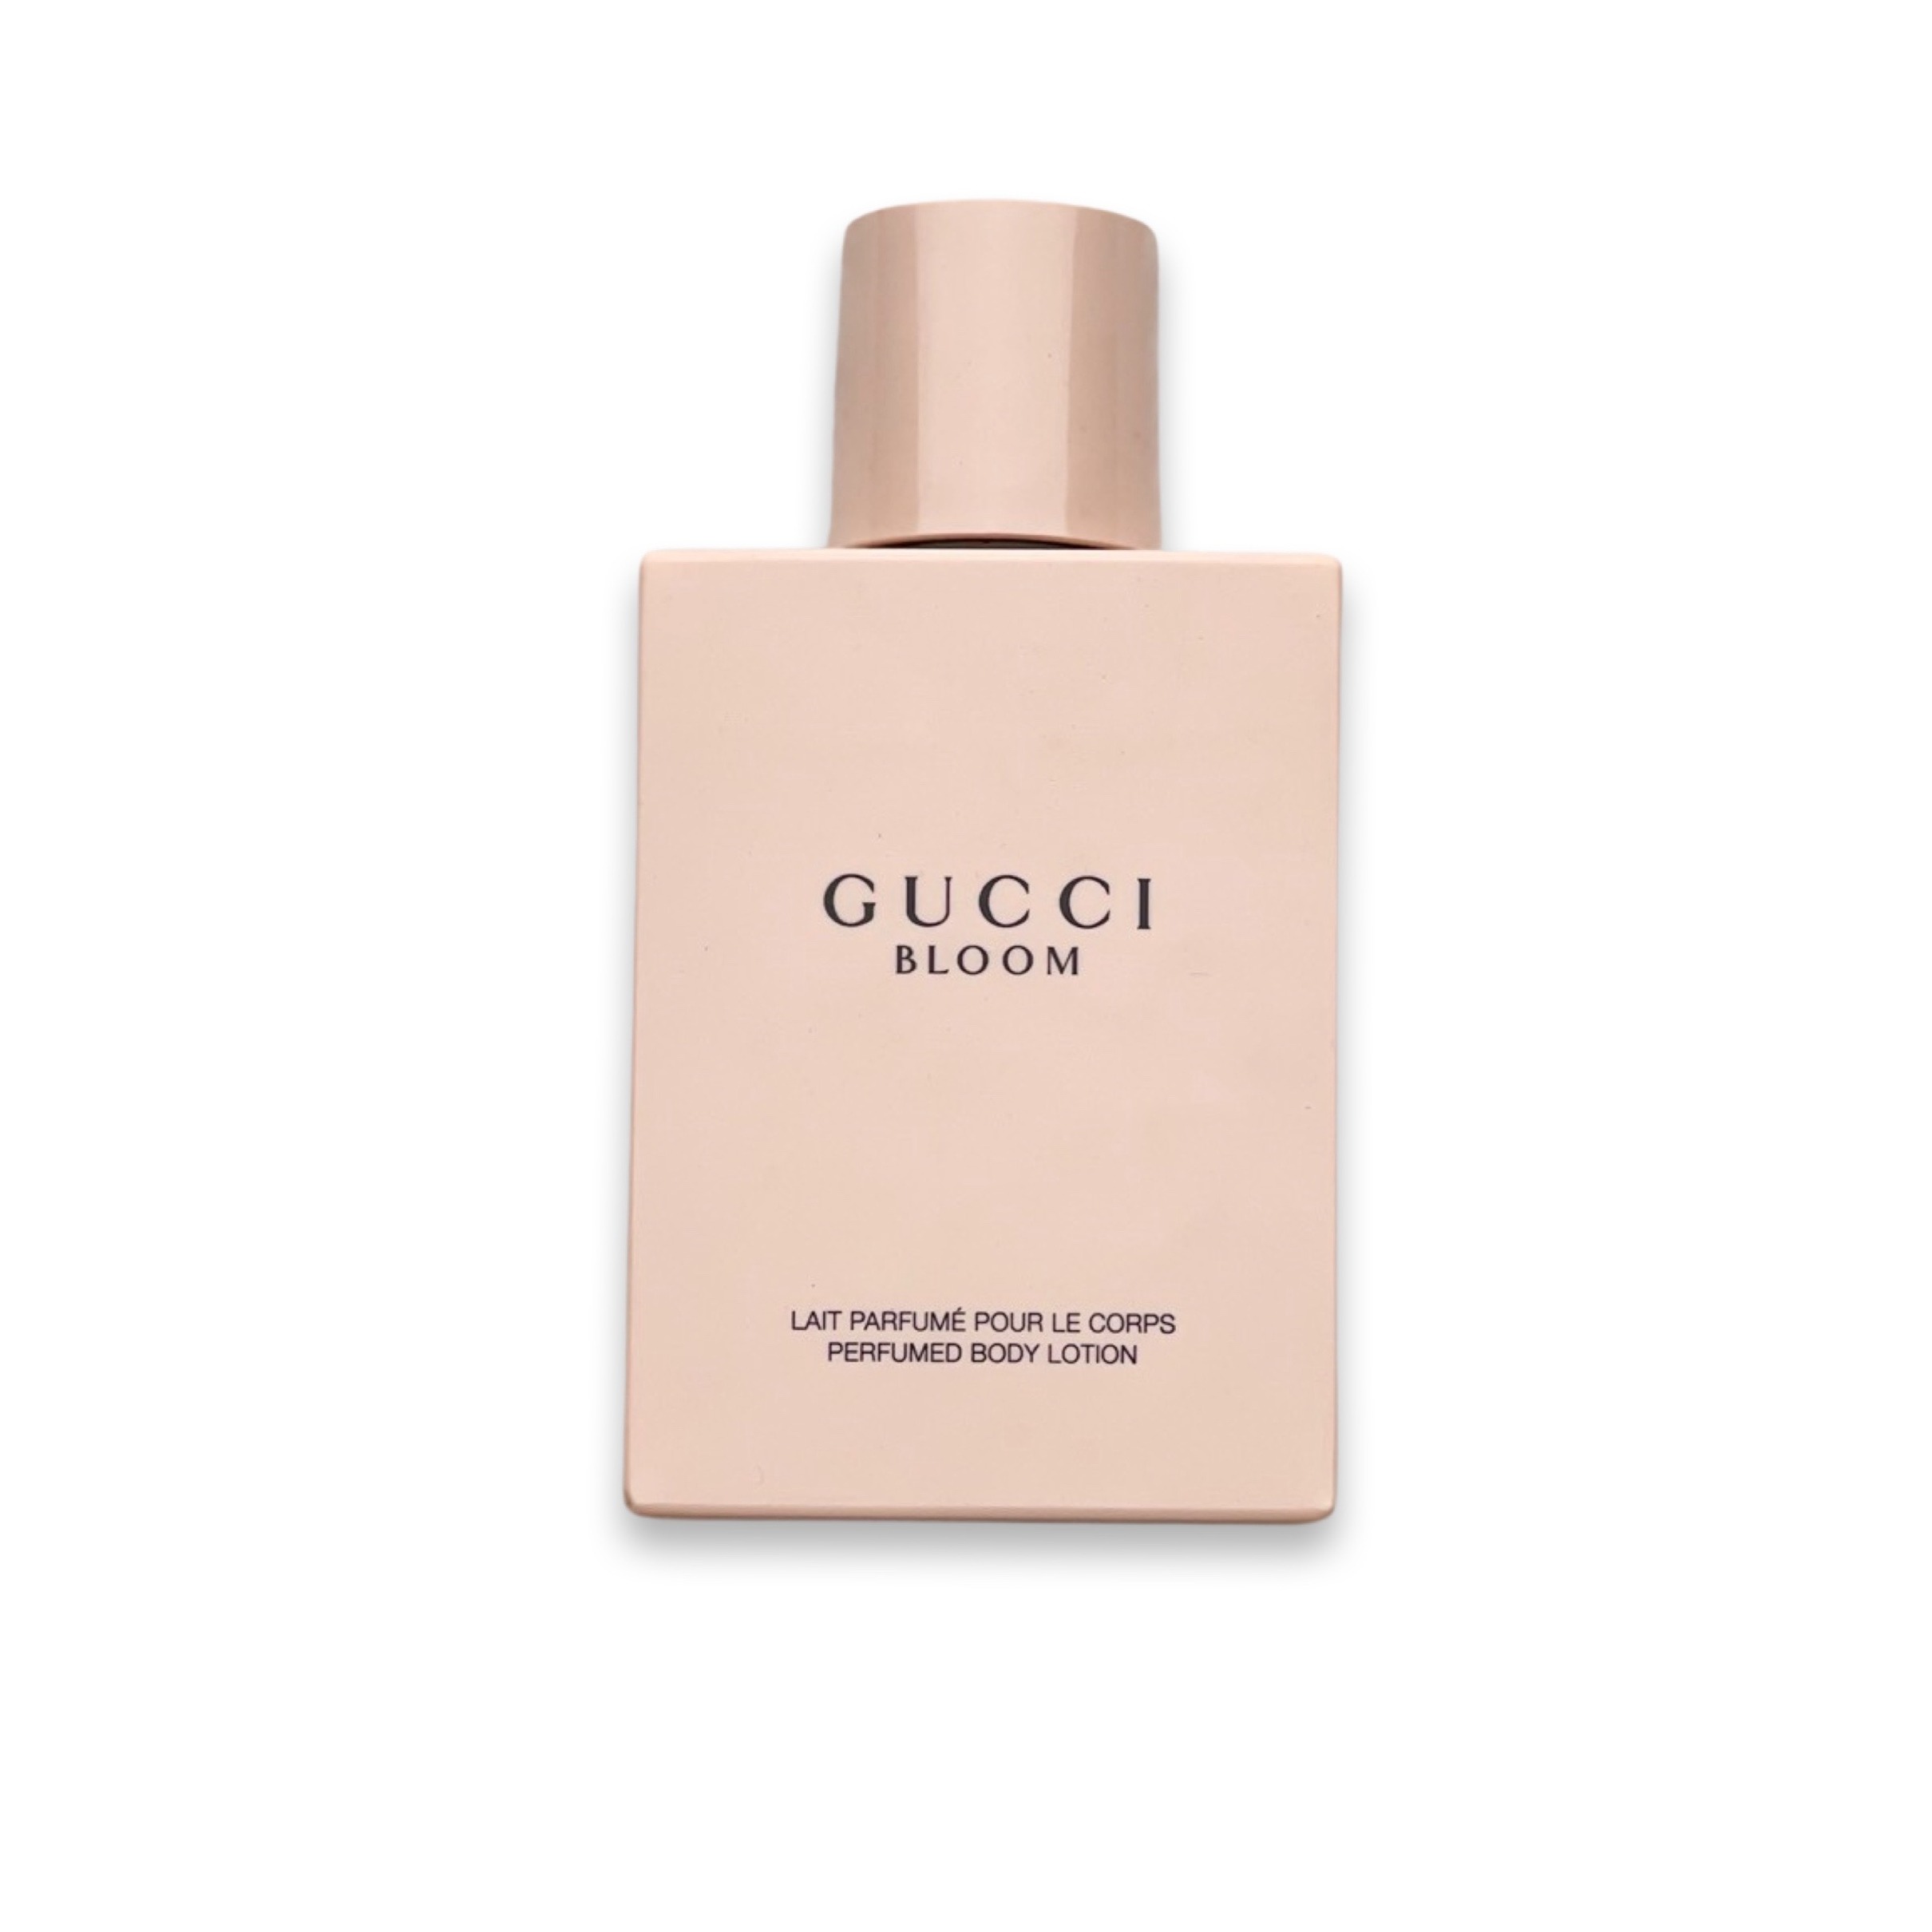 Gucci Bloom Body Lotion / Travel Size (1ml)